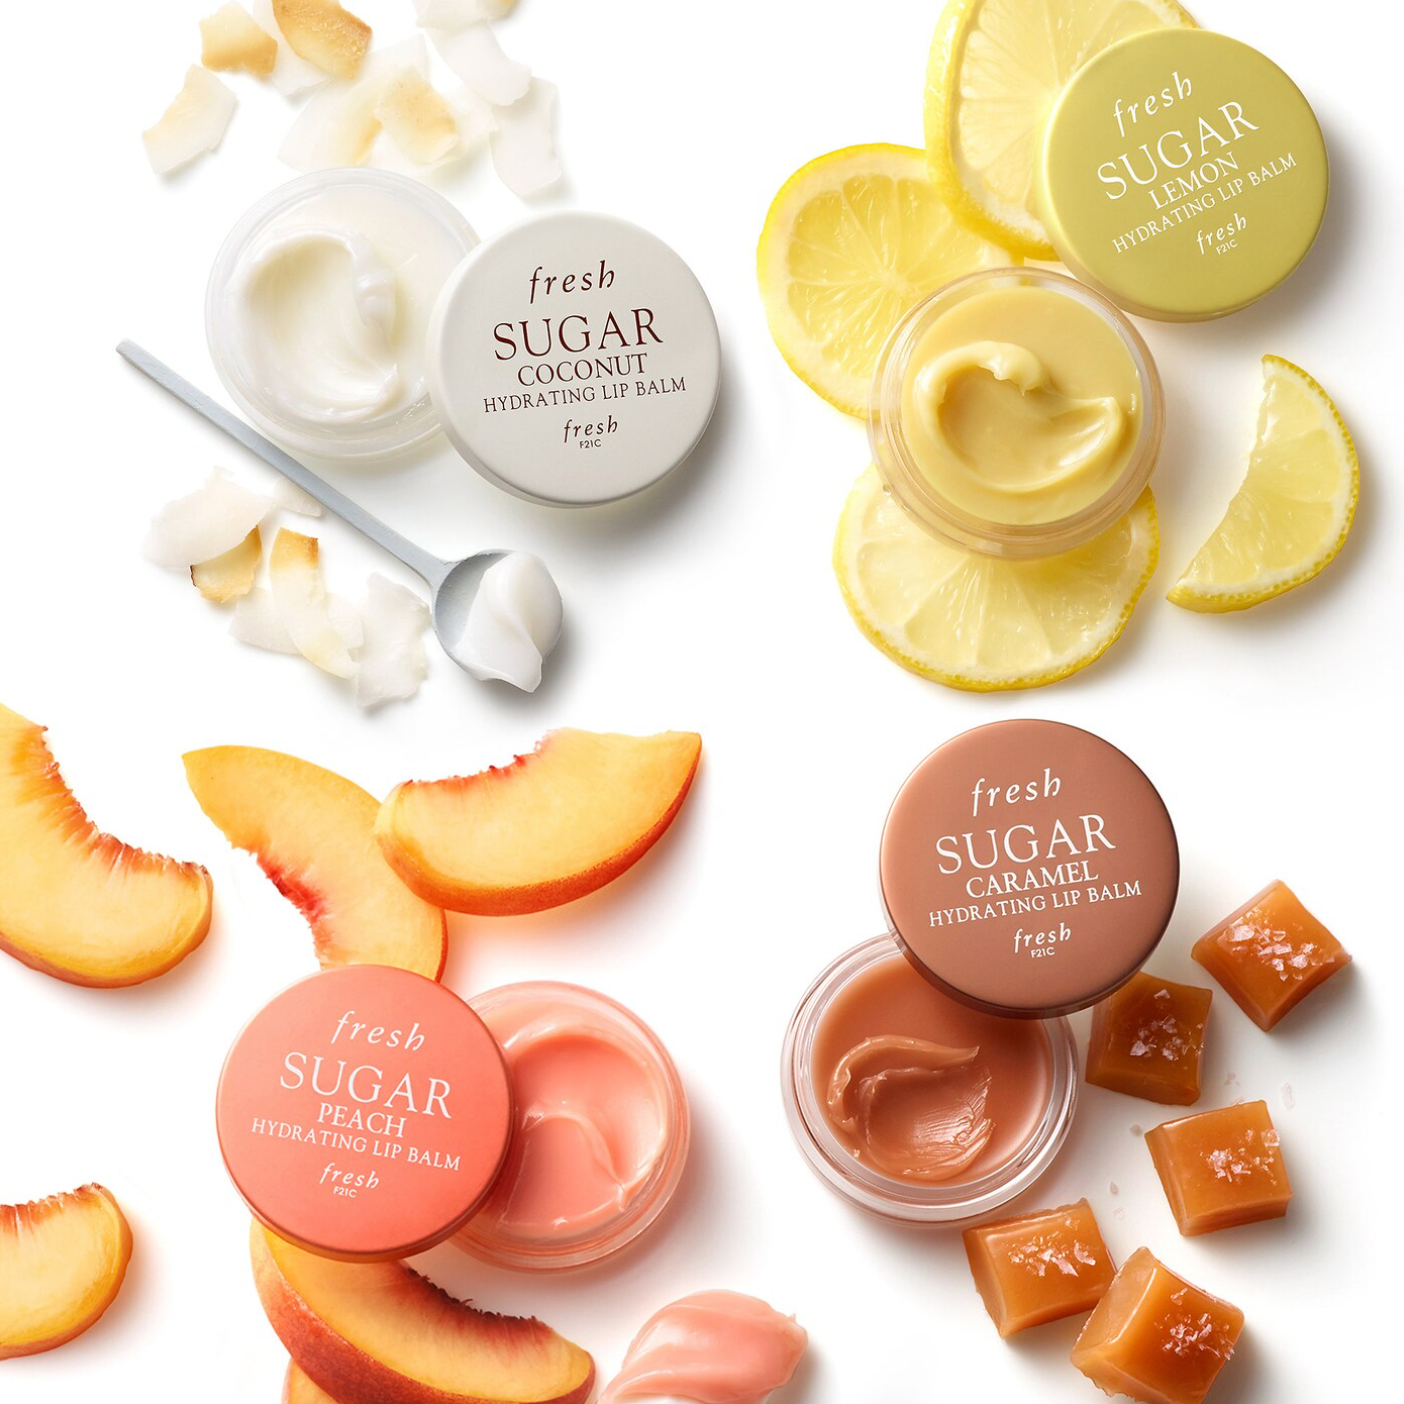 The lip balms in coconut, peach, caramel, and lemon scents